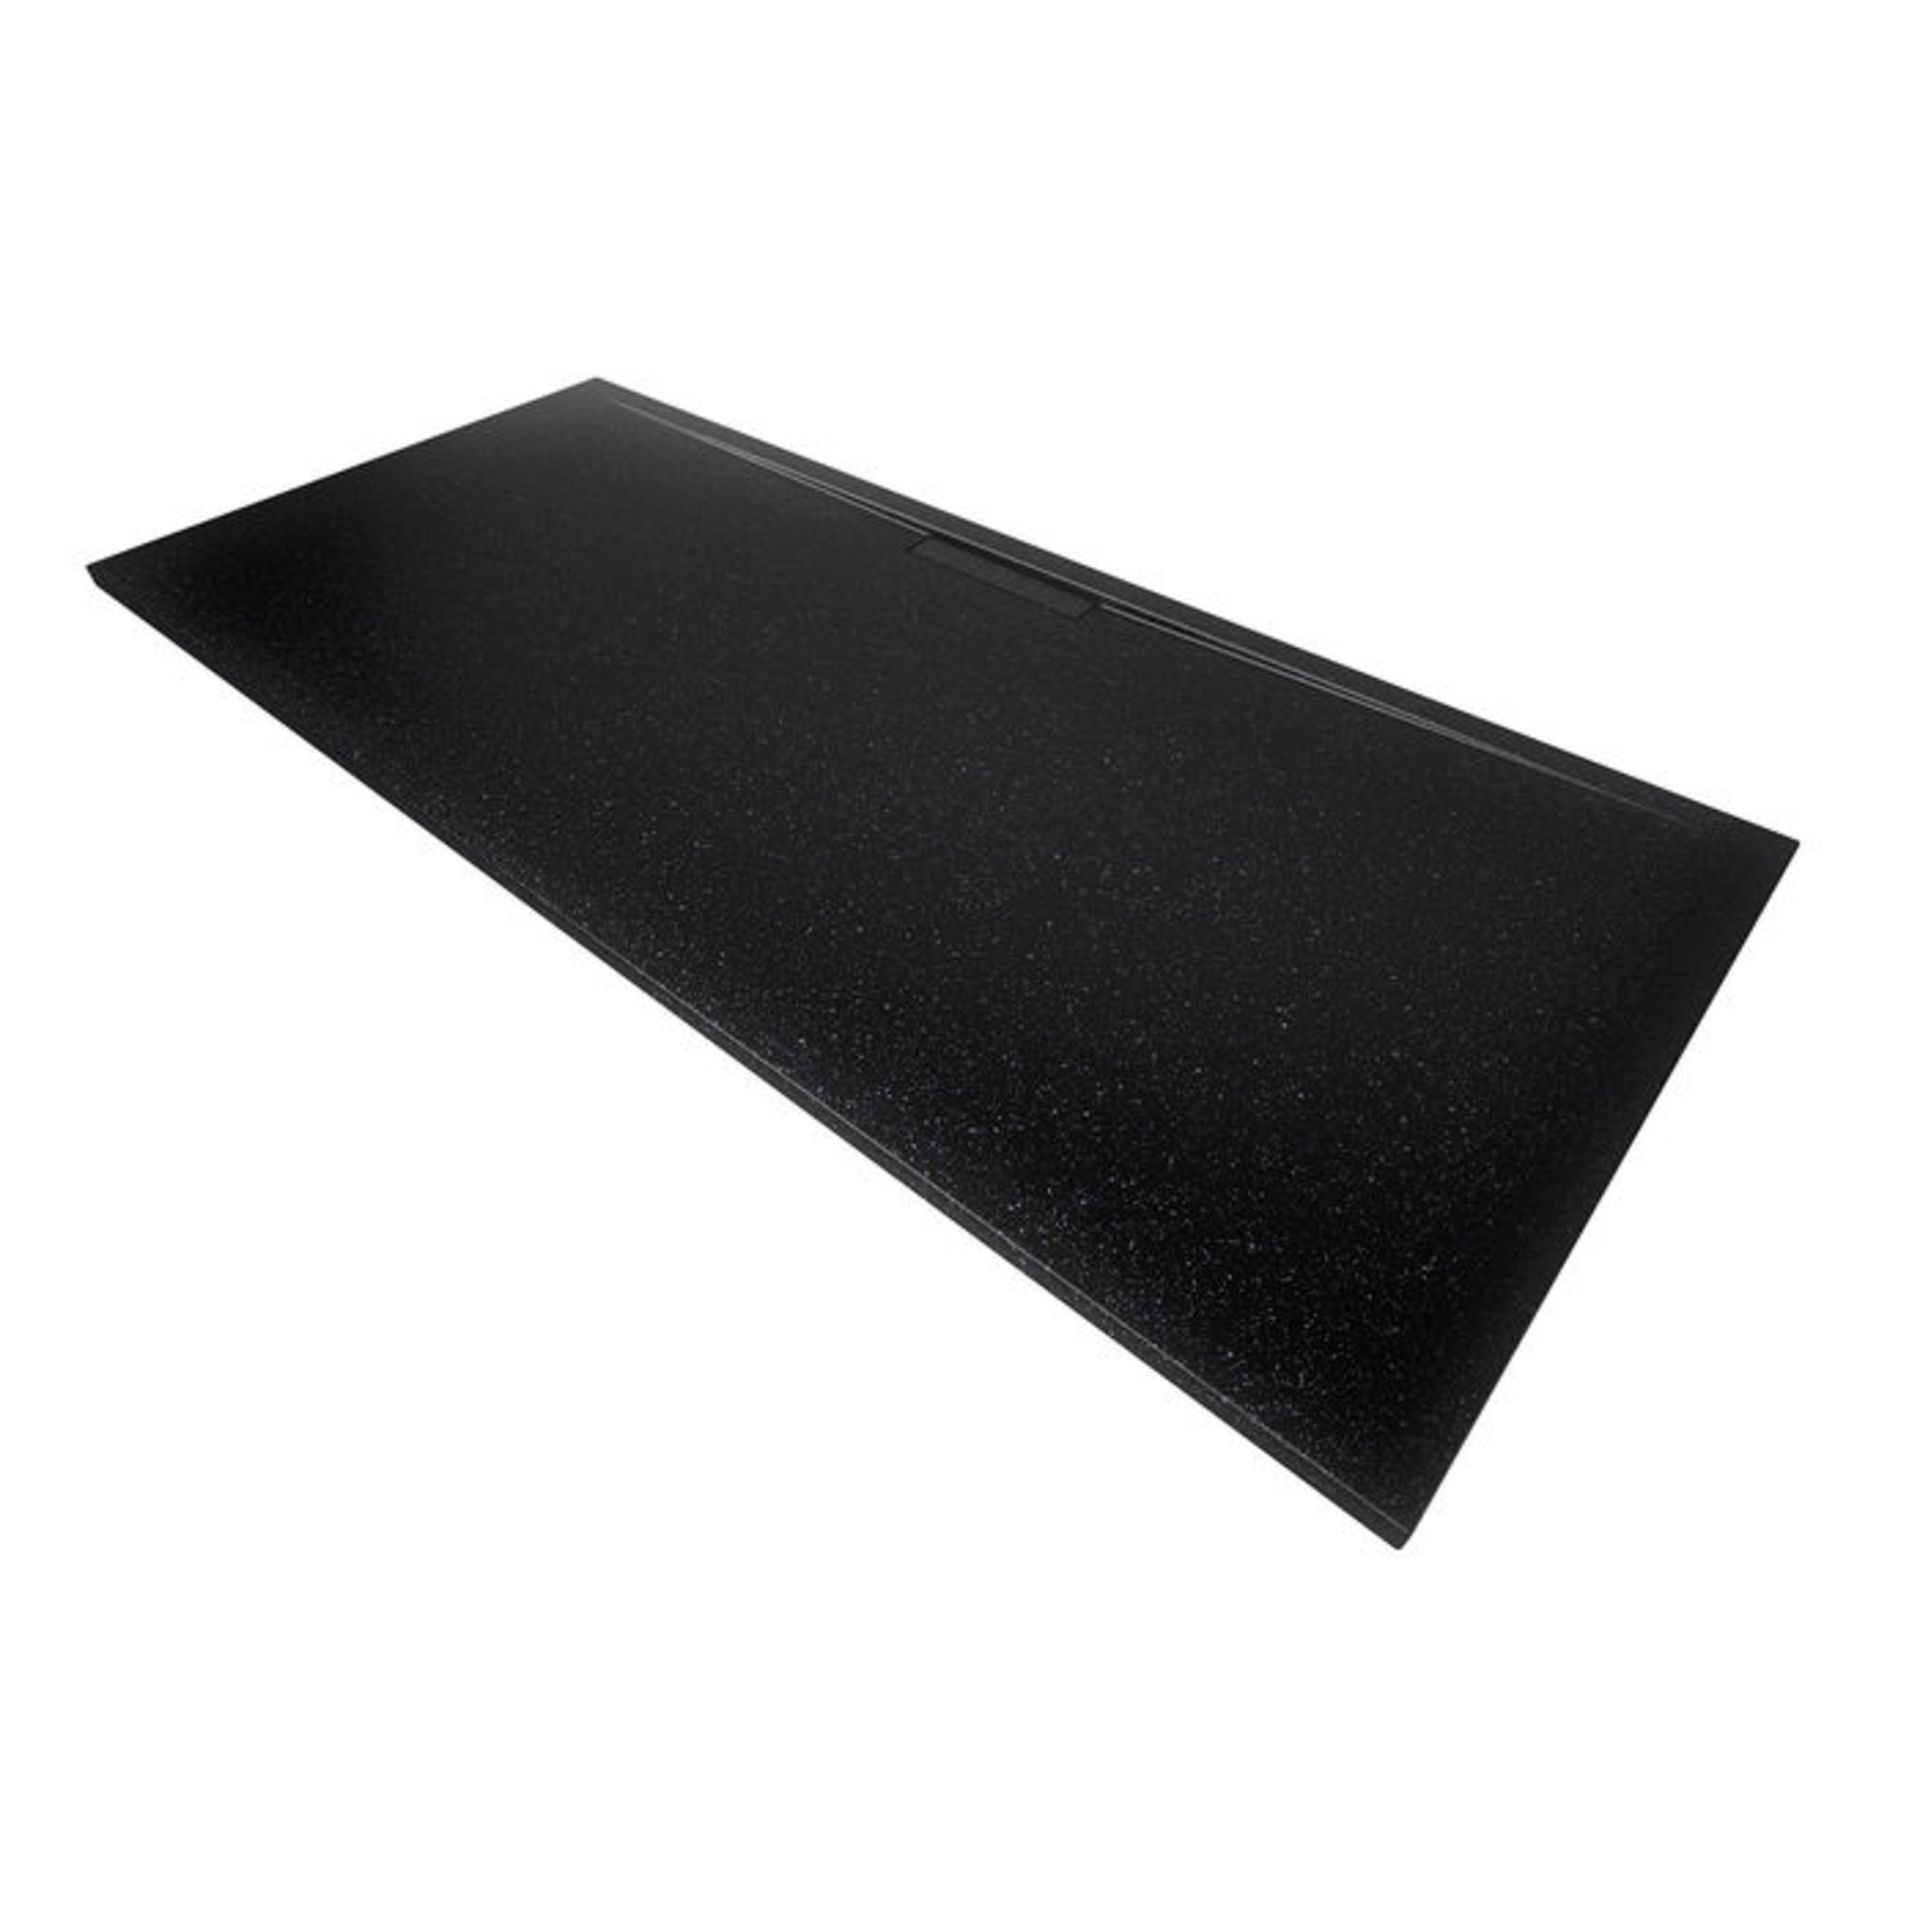 (MQ47) 1200x800mm Luxe Ultra Slim Stone Shower Tray & Hidden Waste - Black. Manufactured in the... - Image 3 of 3